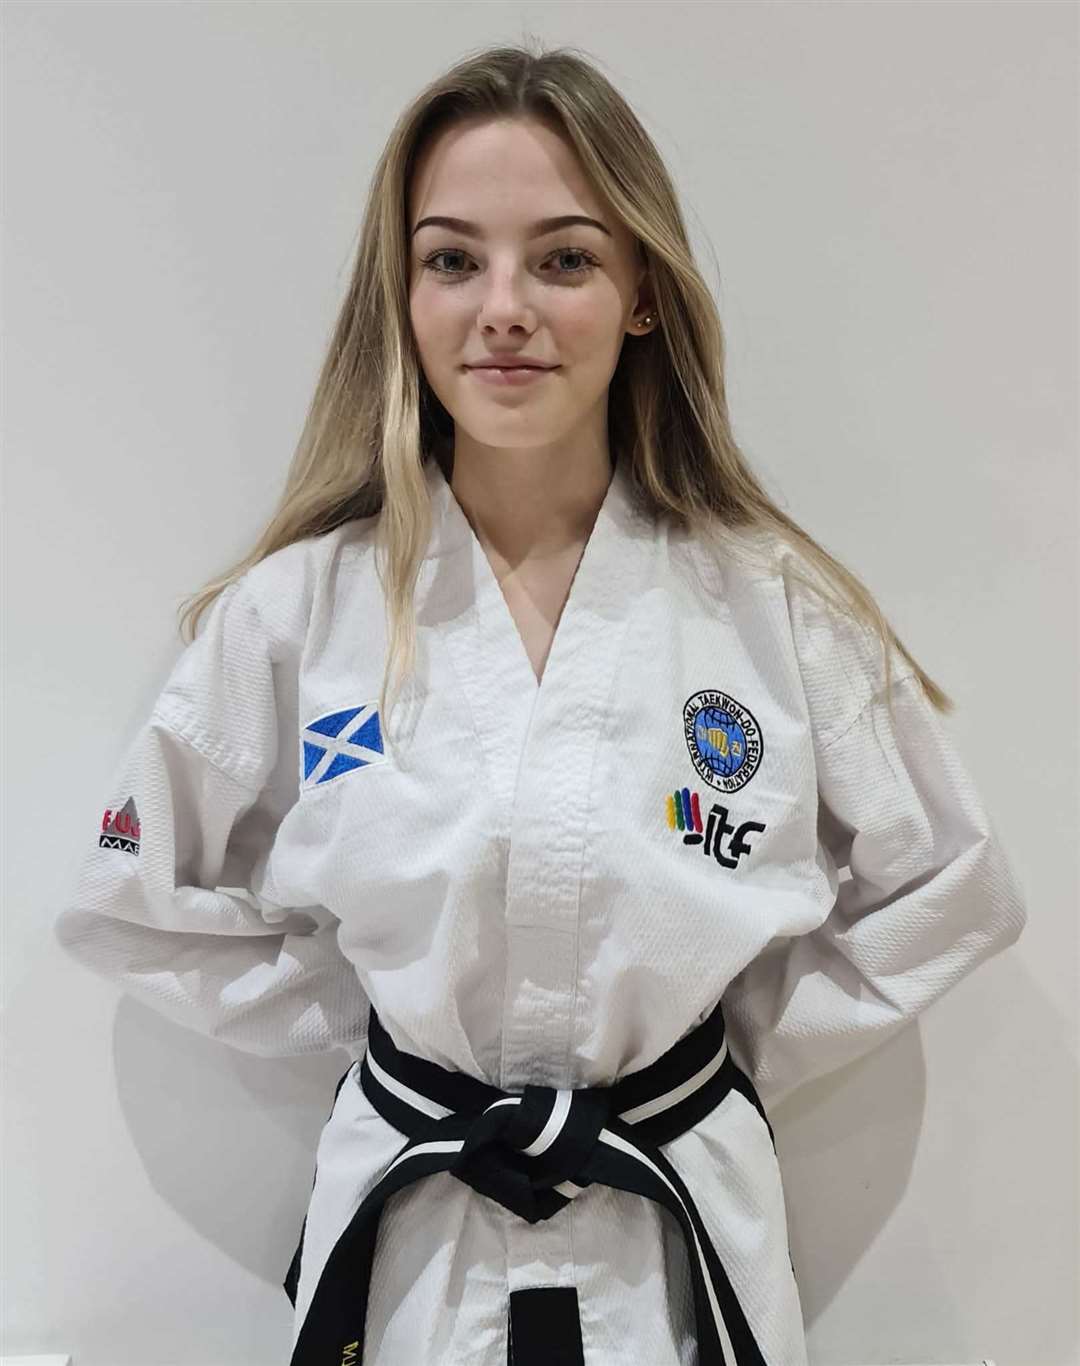 Mia Croall will be making her Scotland debut at the tender age of 14.